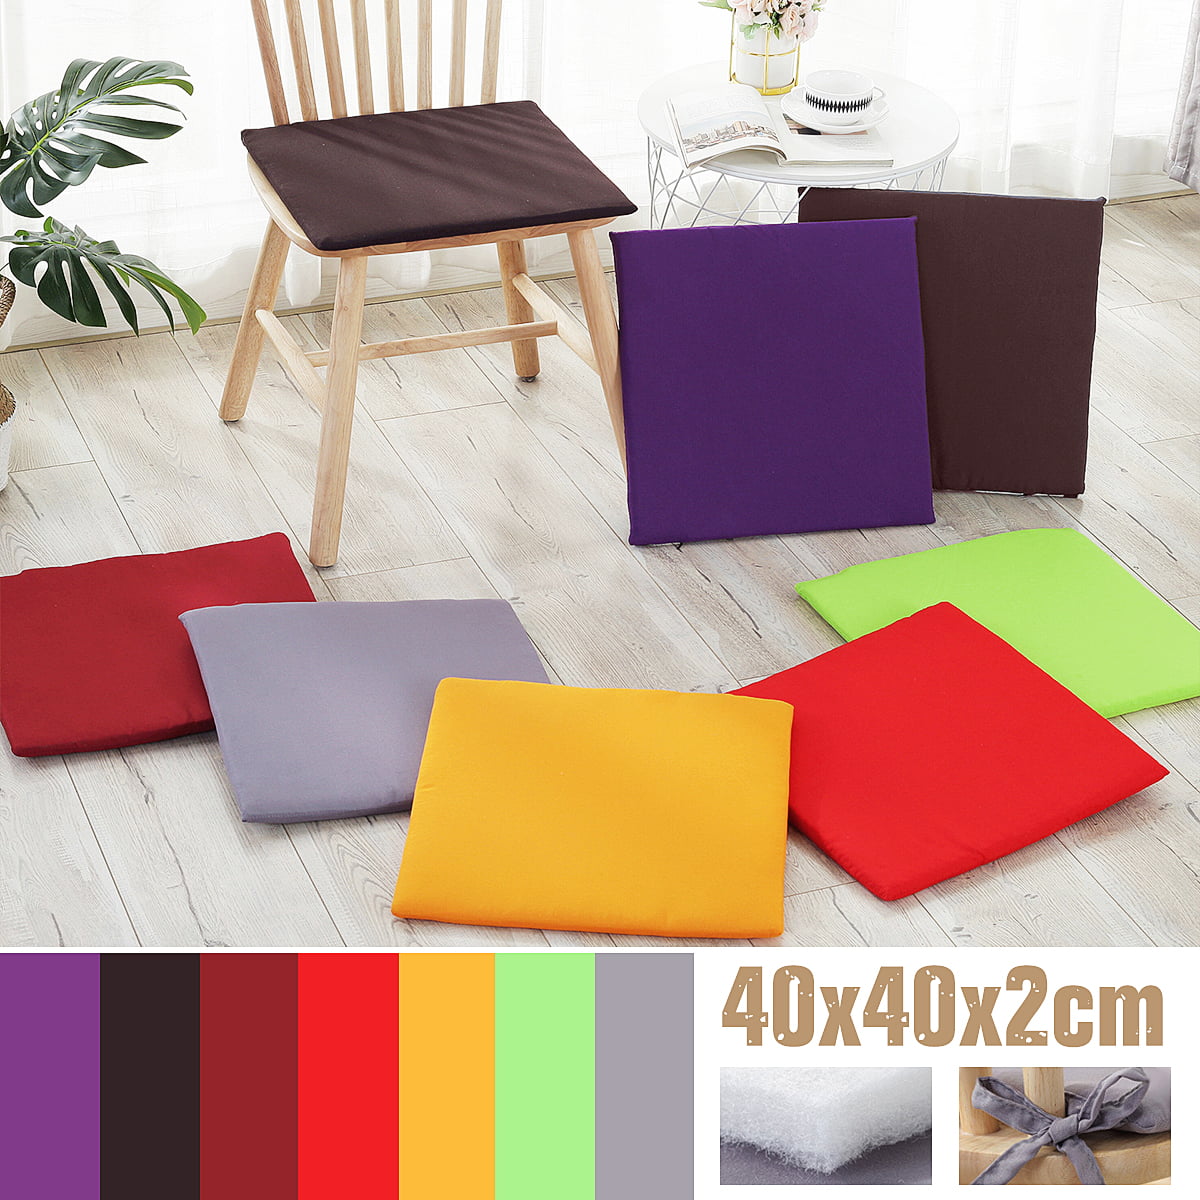 Details about   Outdoor Indoor Dining Garden Patio Soft Chair Seat Pad Cushion Home Decor 16x16 